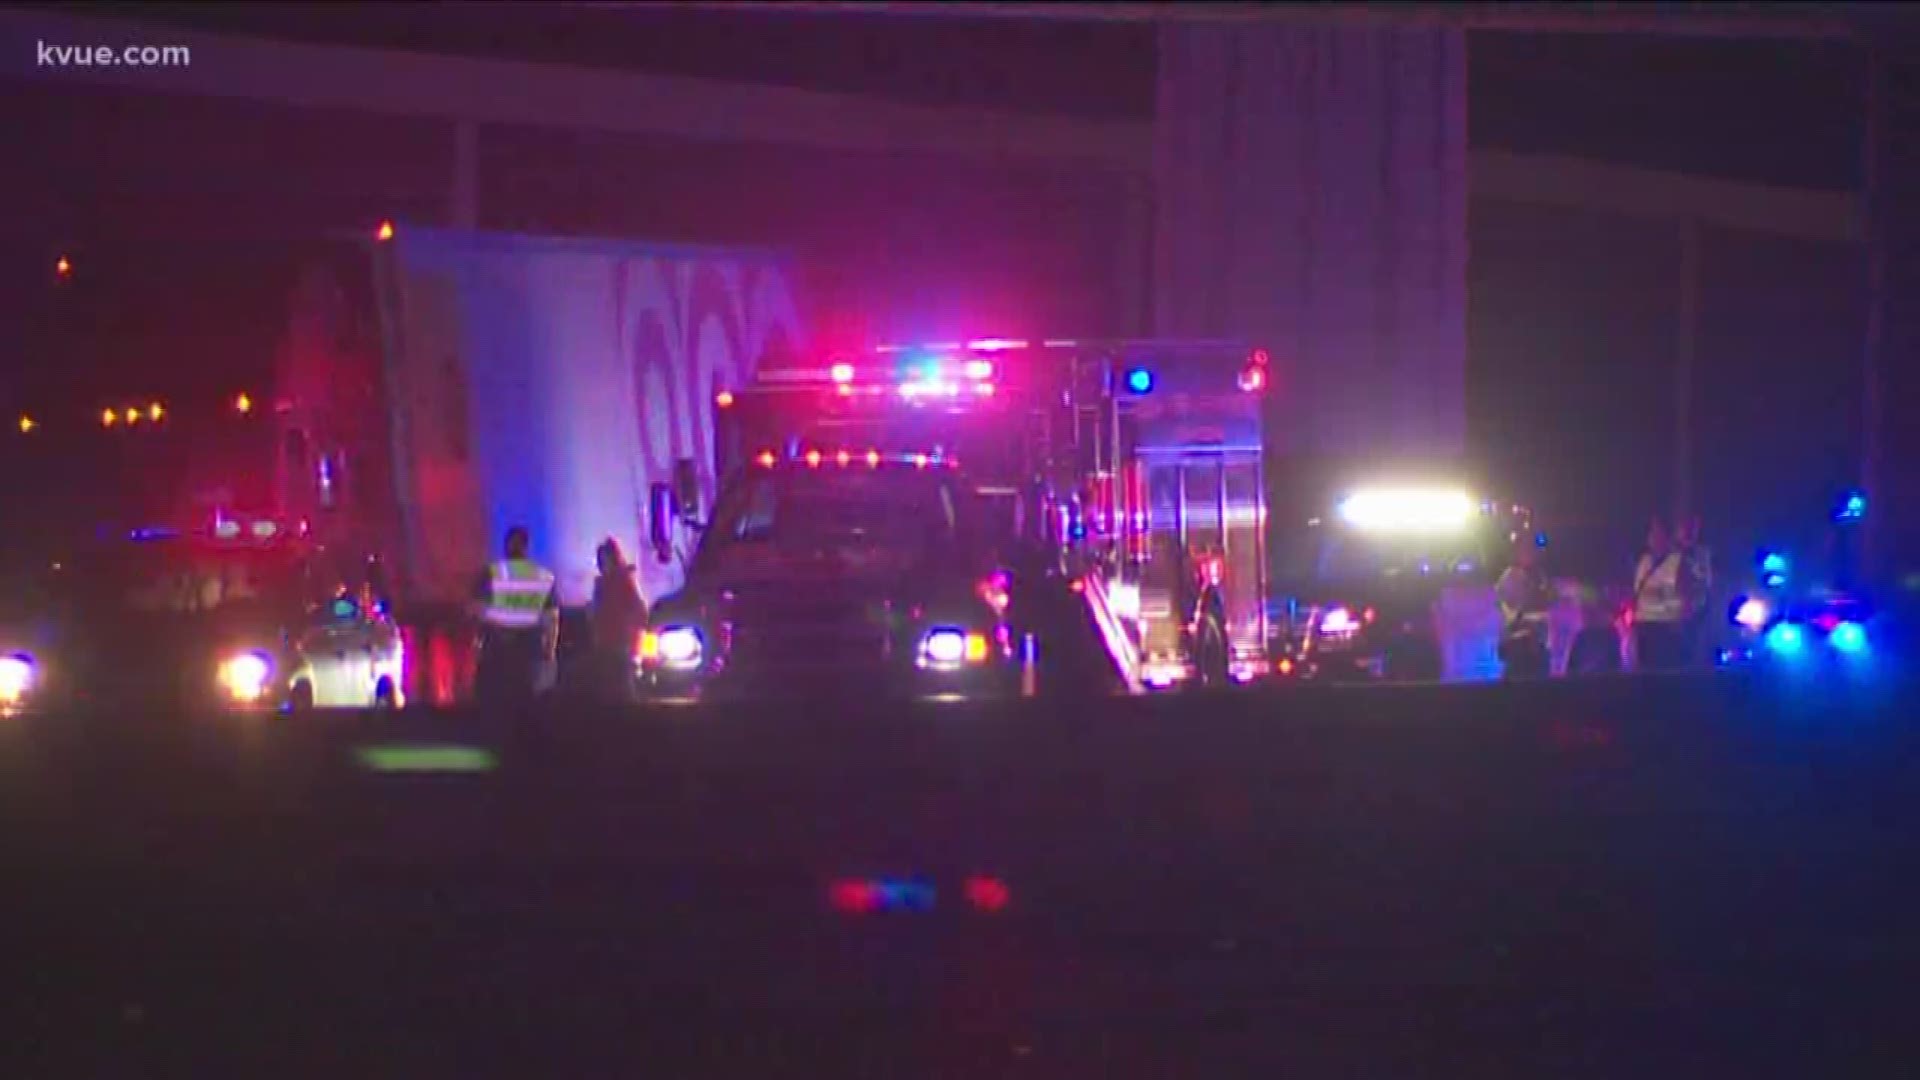 A motorcyclist has died after colliding with an 18-wheeler in Kyle Sunday night.